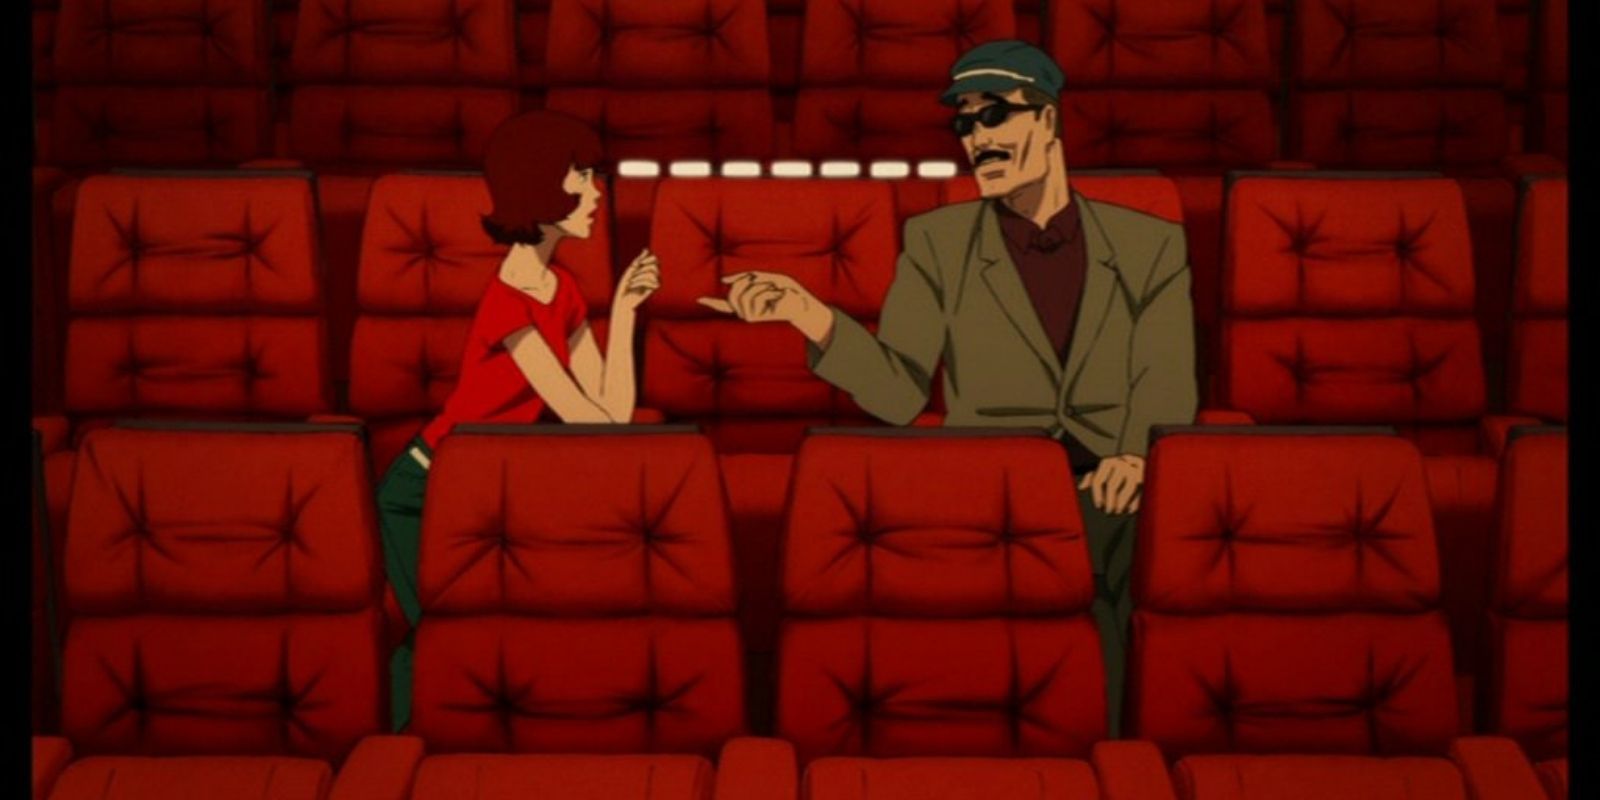 Movie Theater in Paprika